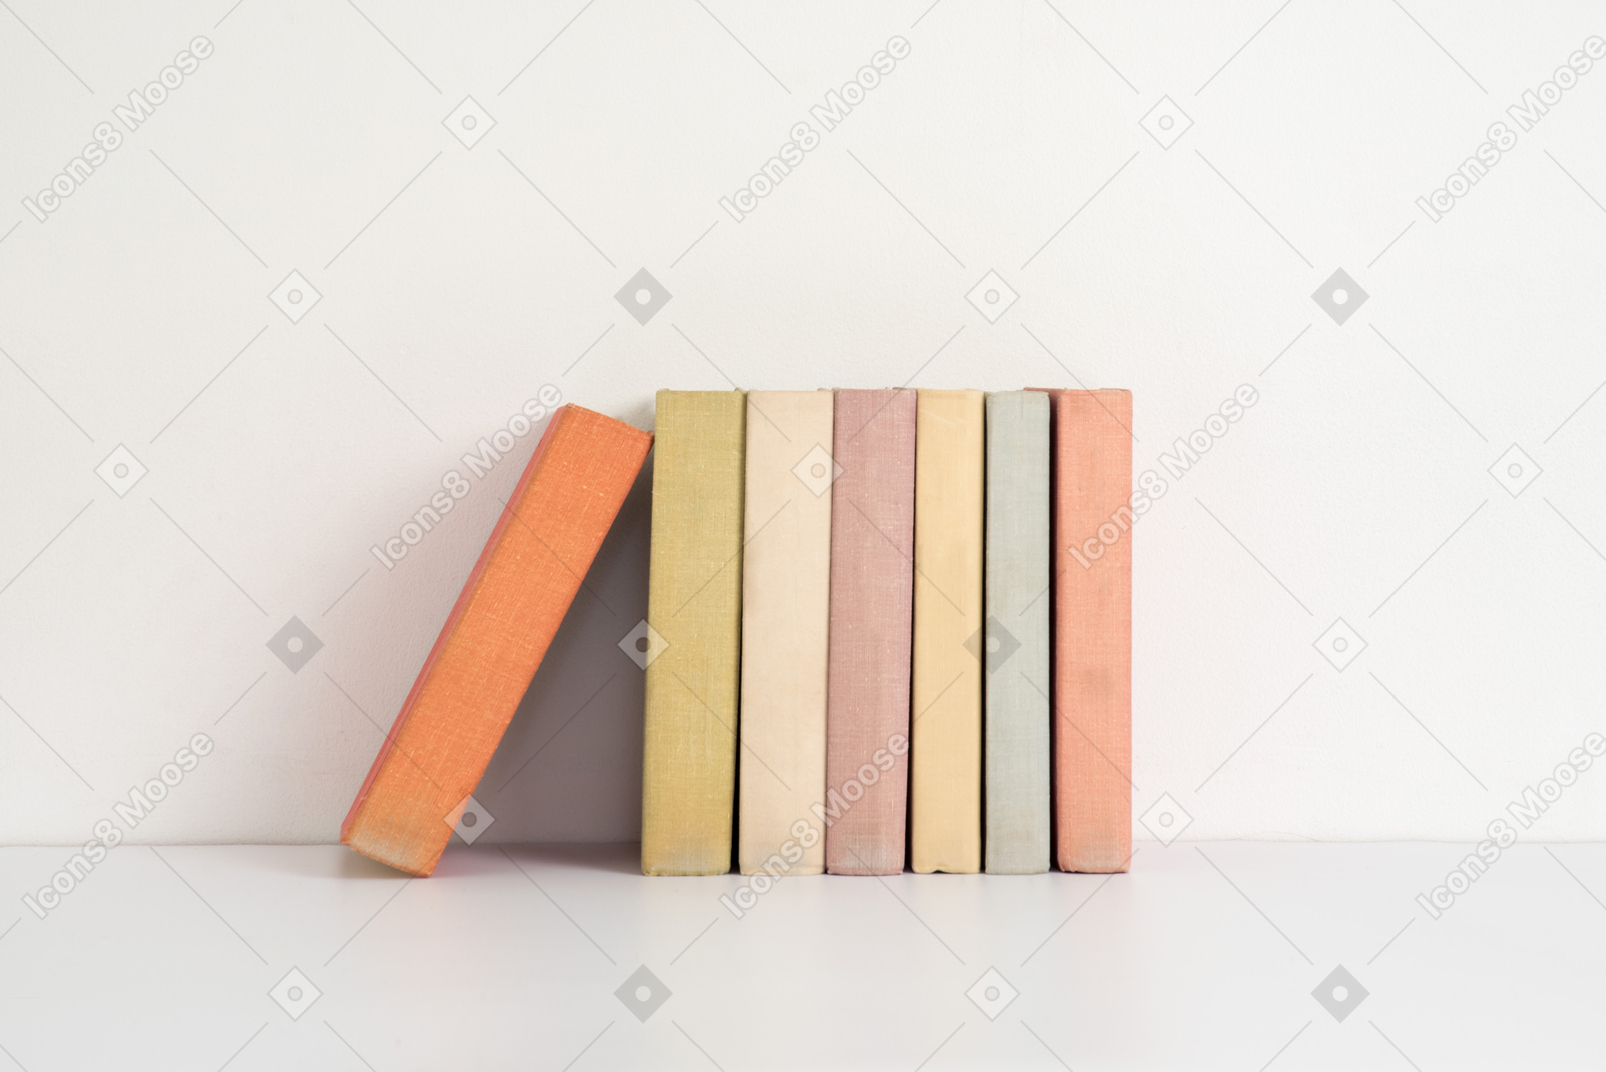 Books in a row with one book standing out